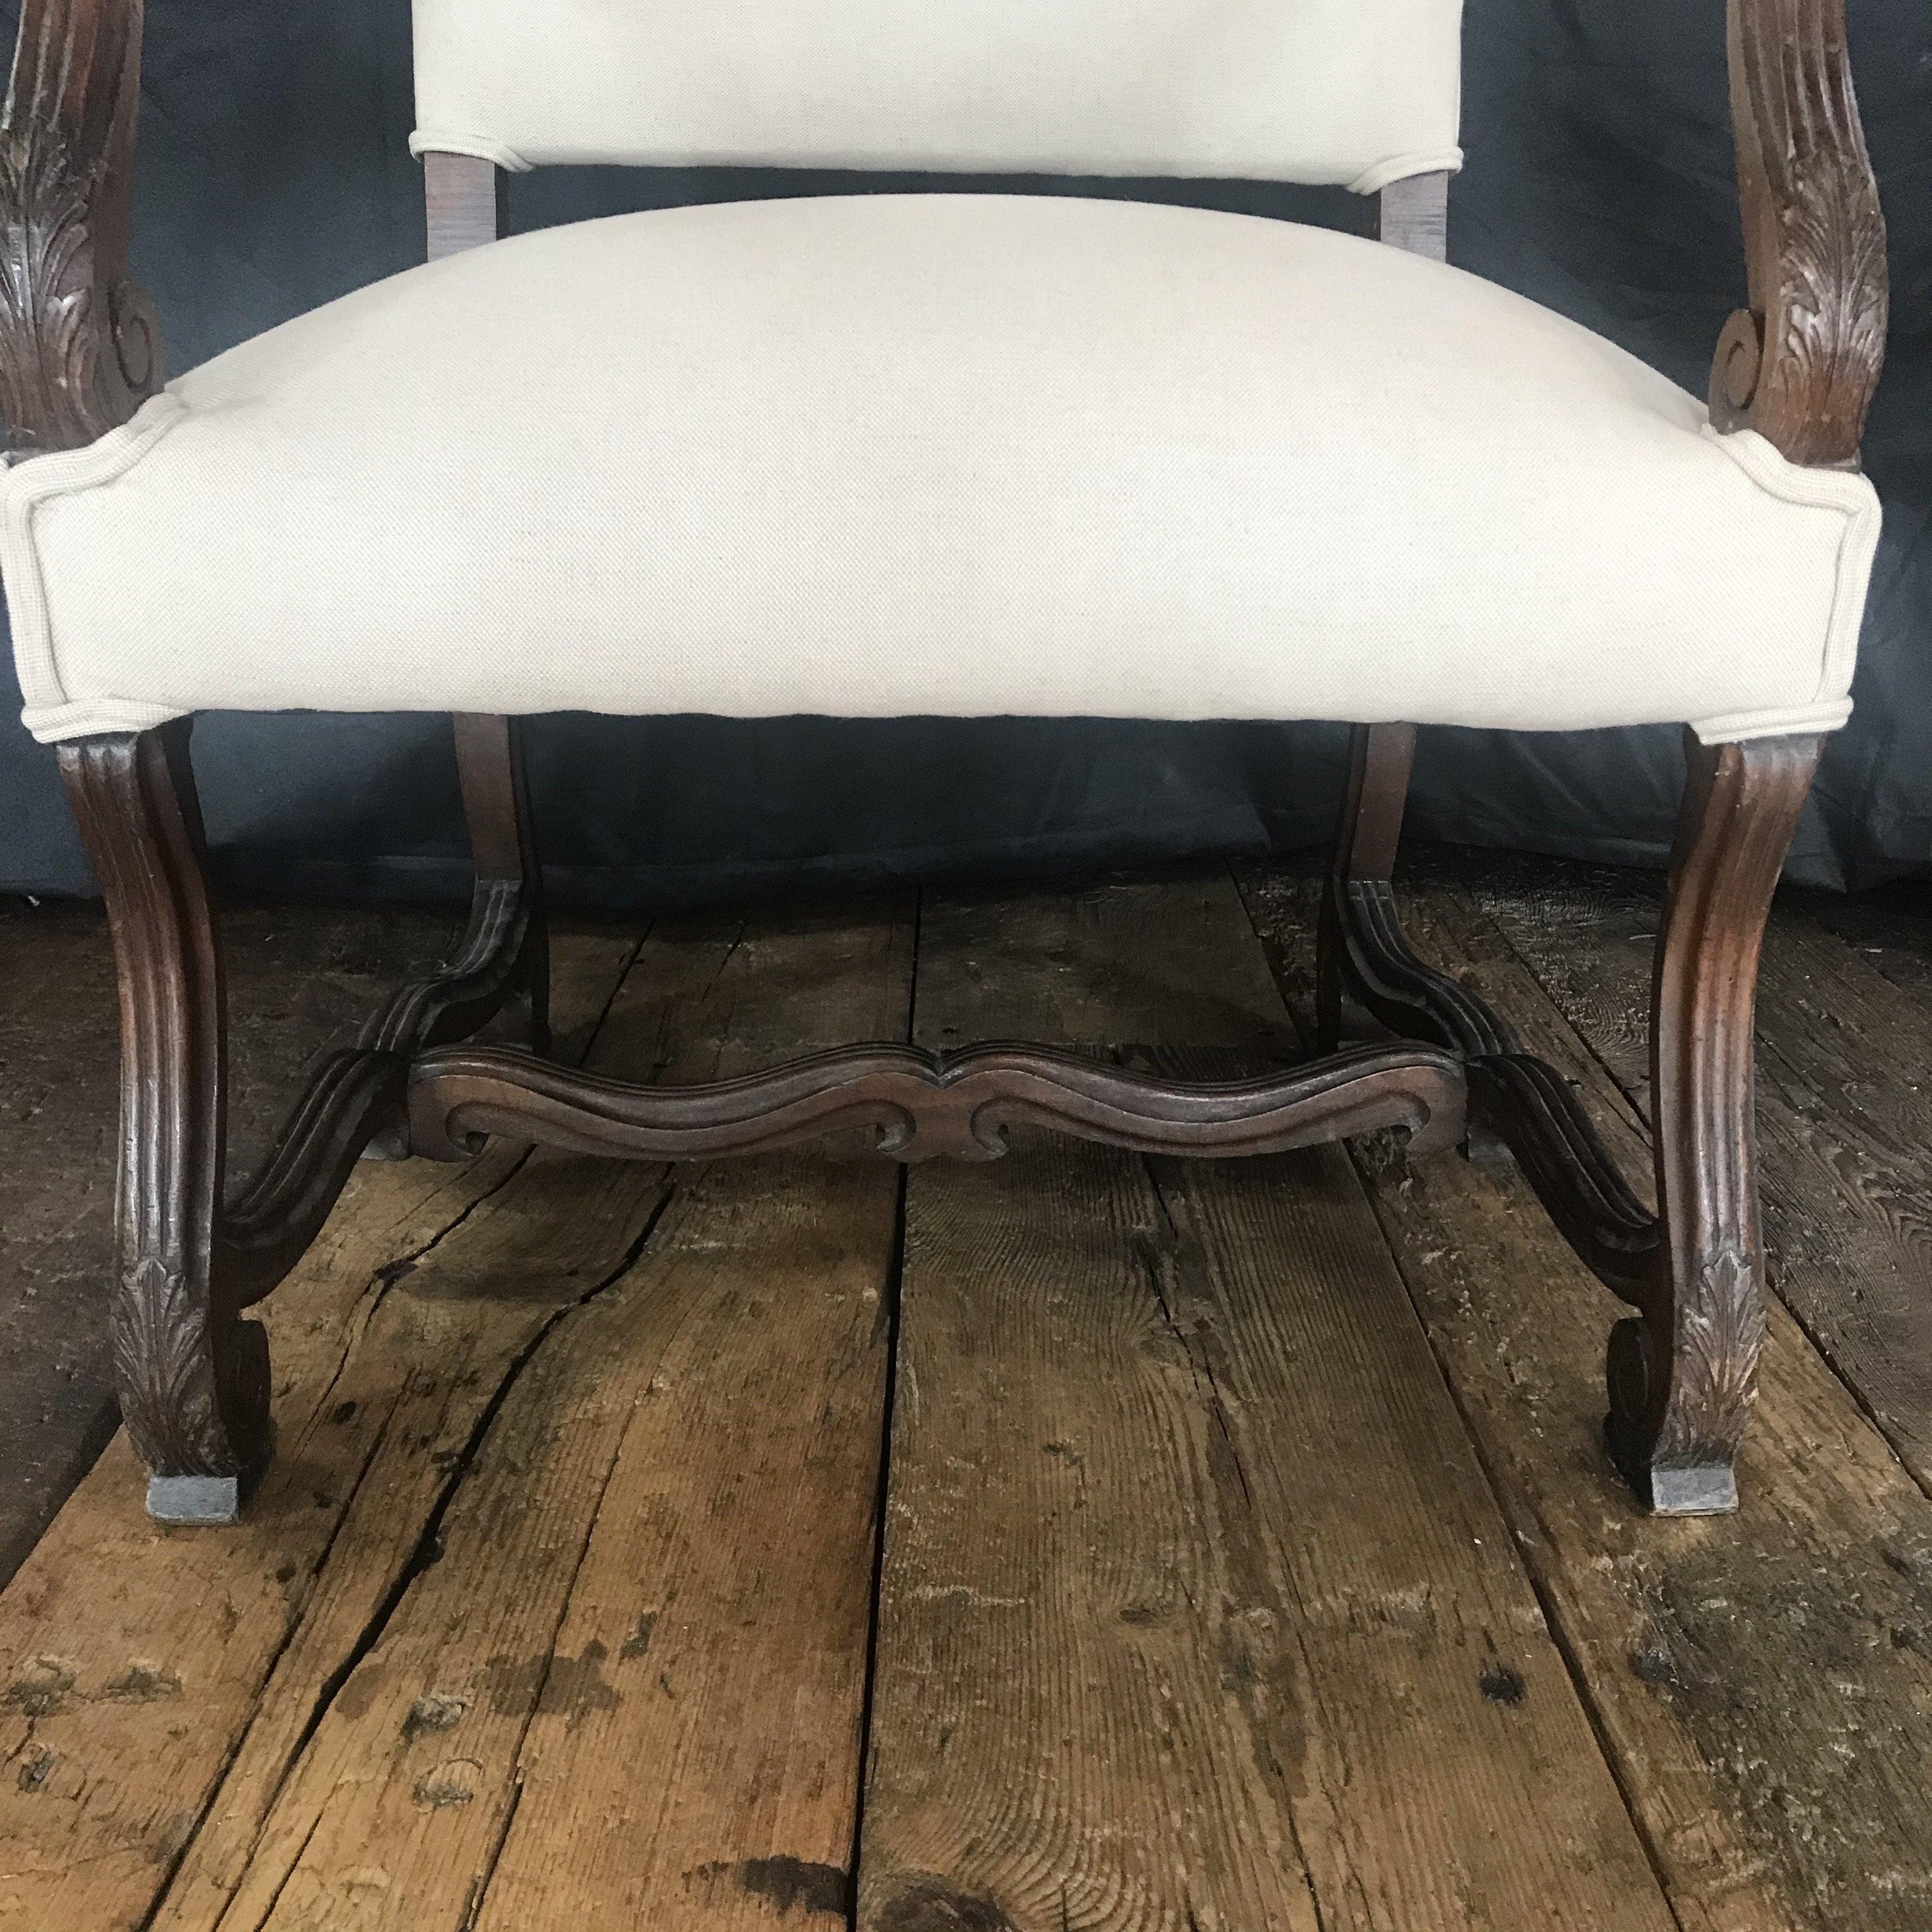 French 19th century walnut carved Louis XV armchair or head dining chair.
This gorgeous French 19th century walnut carved Louis XV armchair or head dining chair can be used in a number of settings - living room, bedroom, or, matched with another of